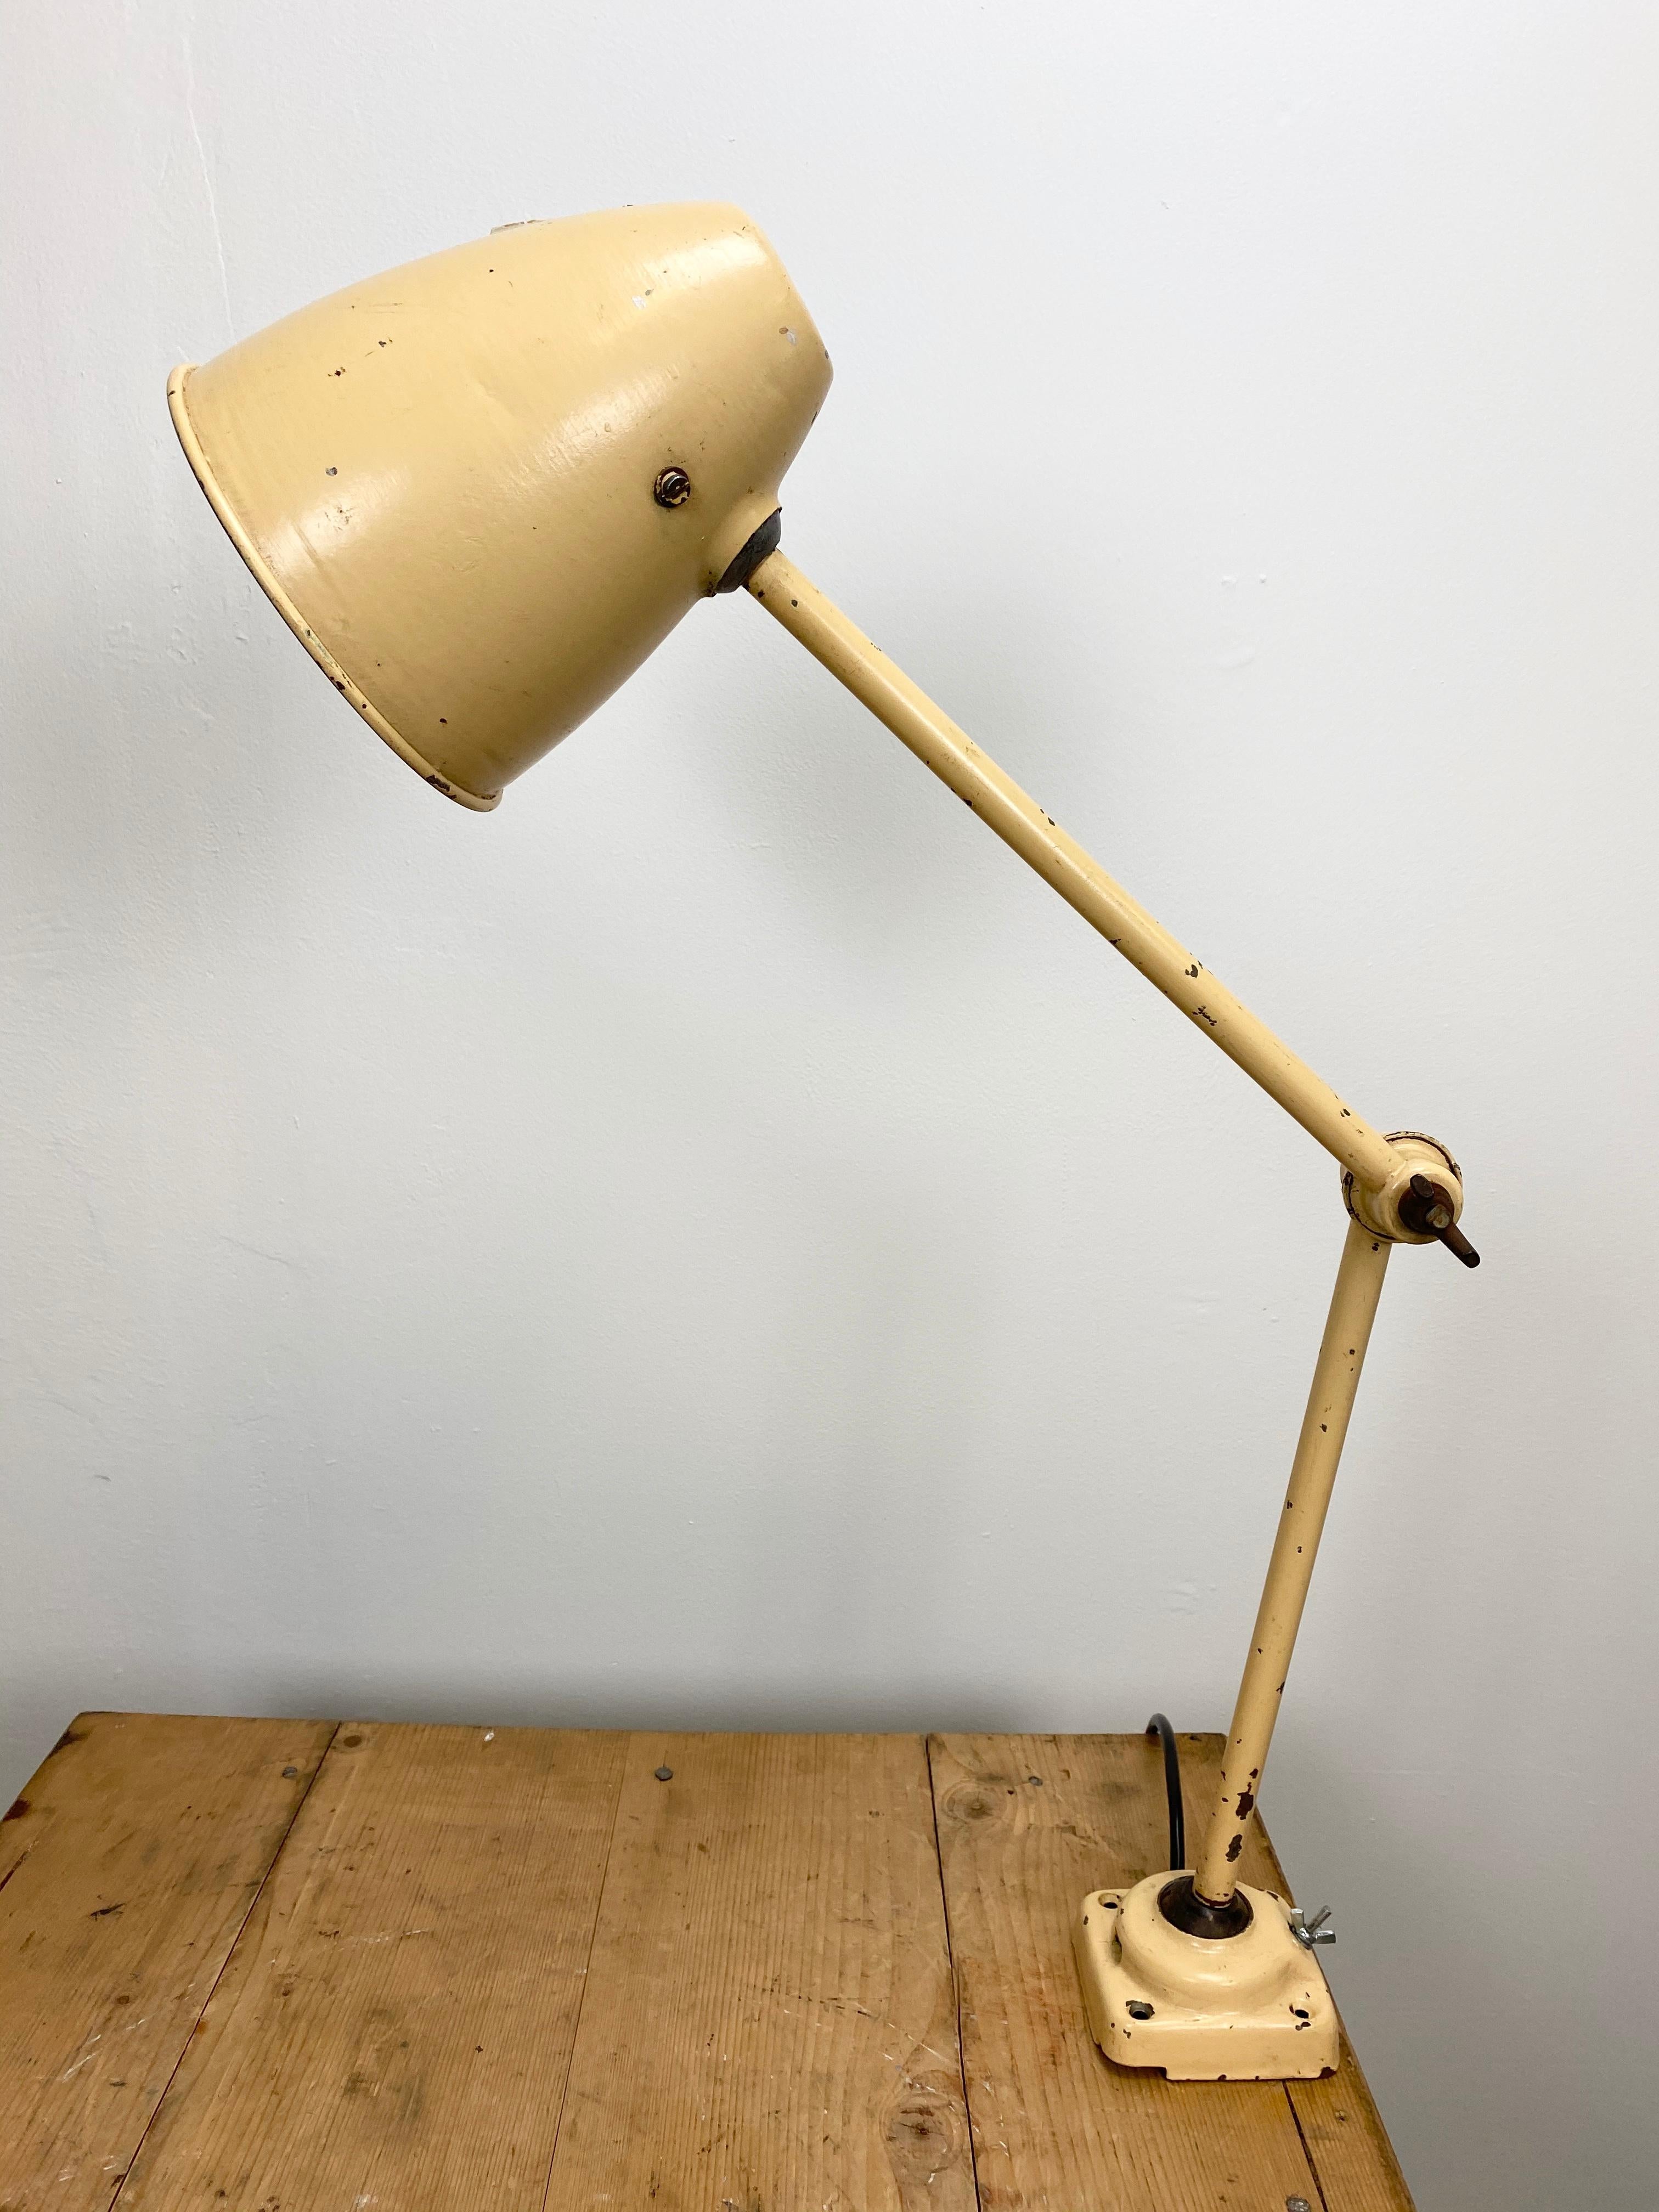 This beige industrial-style iron table lamp is made in former Czechoslovakia. It has an adjustable shade, three adjustable joints, a new porcelain socket for E 27 light bulbs and new wire. The switch is situated directly on the shade. Fully